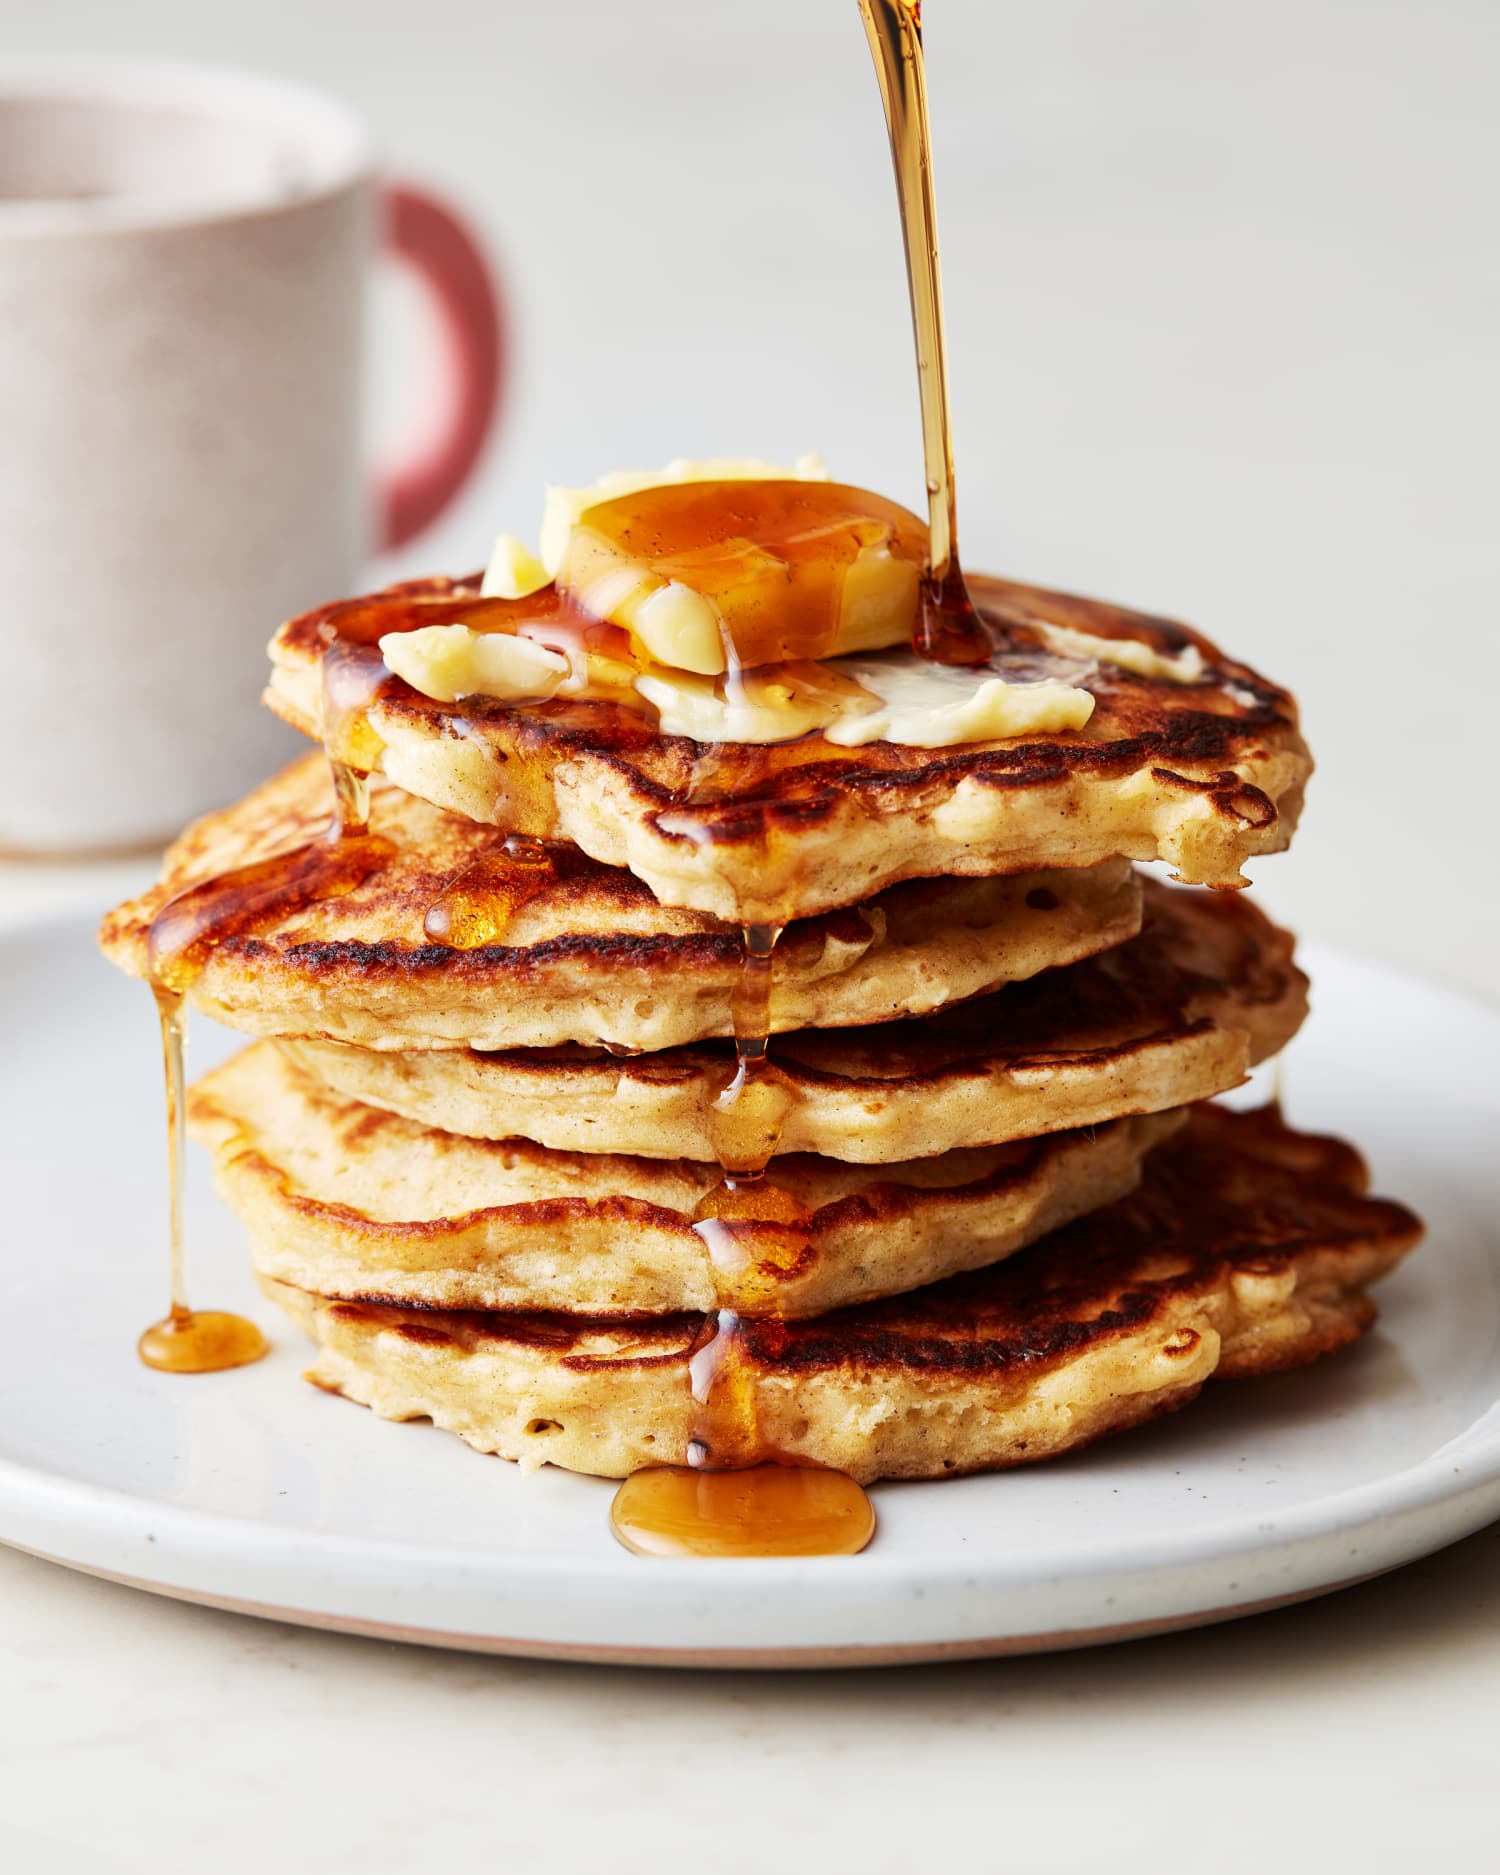 The Easy Oatmeal Pancakes Your Family Will Go Crazy For (We Promise)